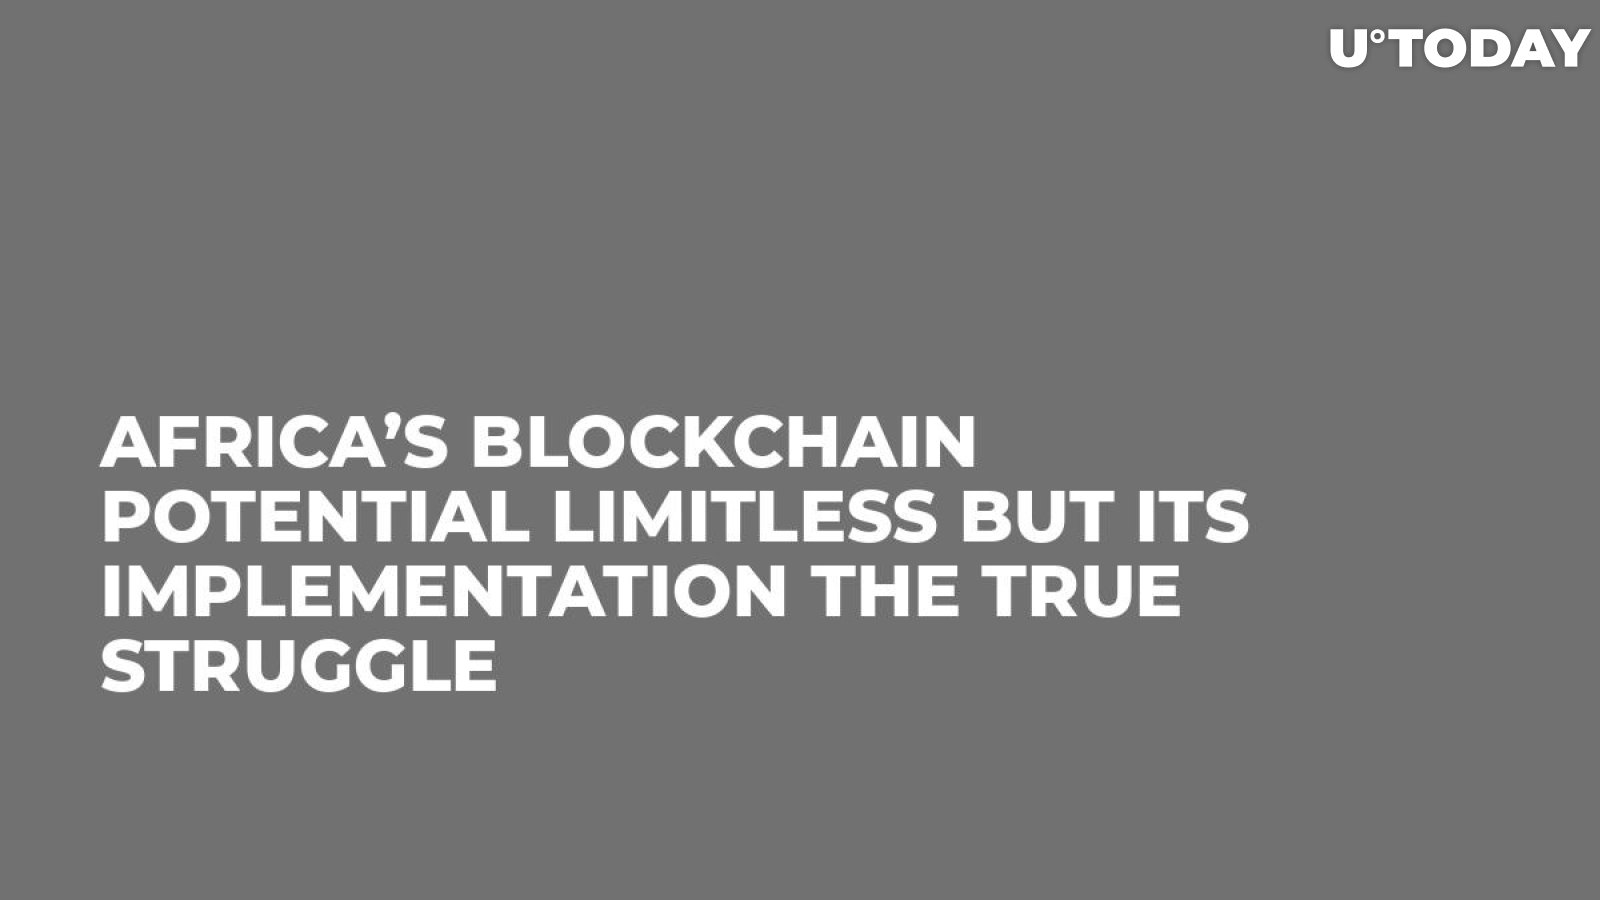 Africa’s Blockchain Potential Limitless But Its Implementation the True Struggle